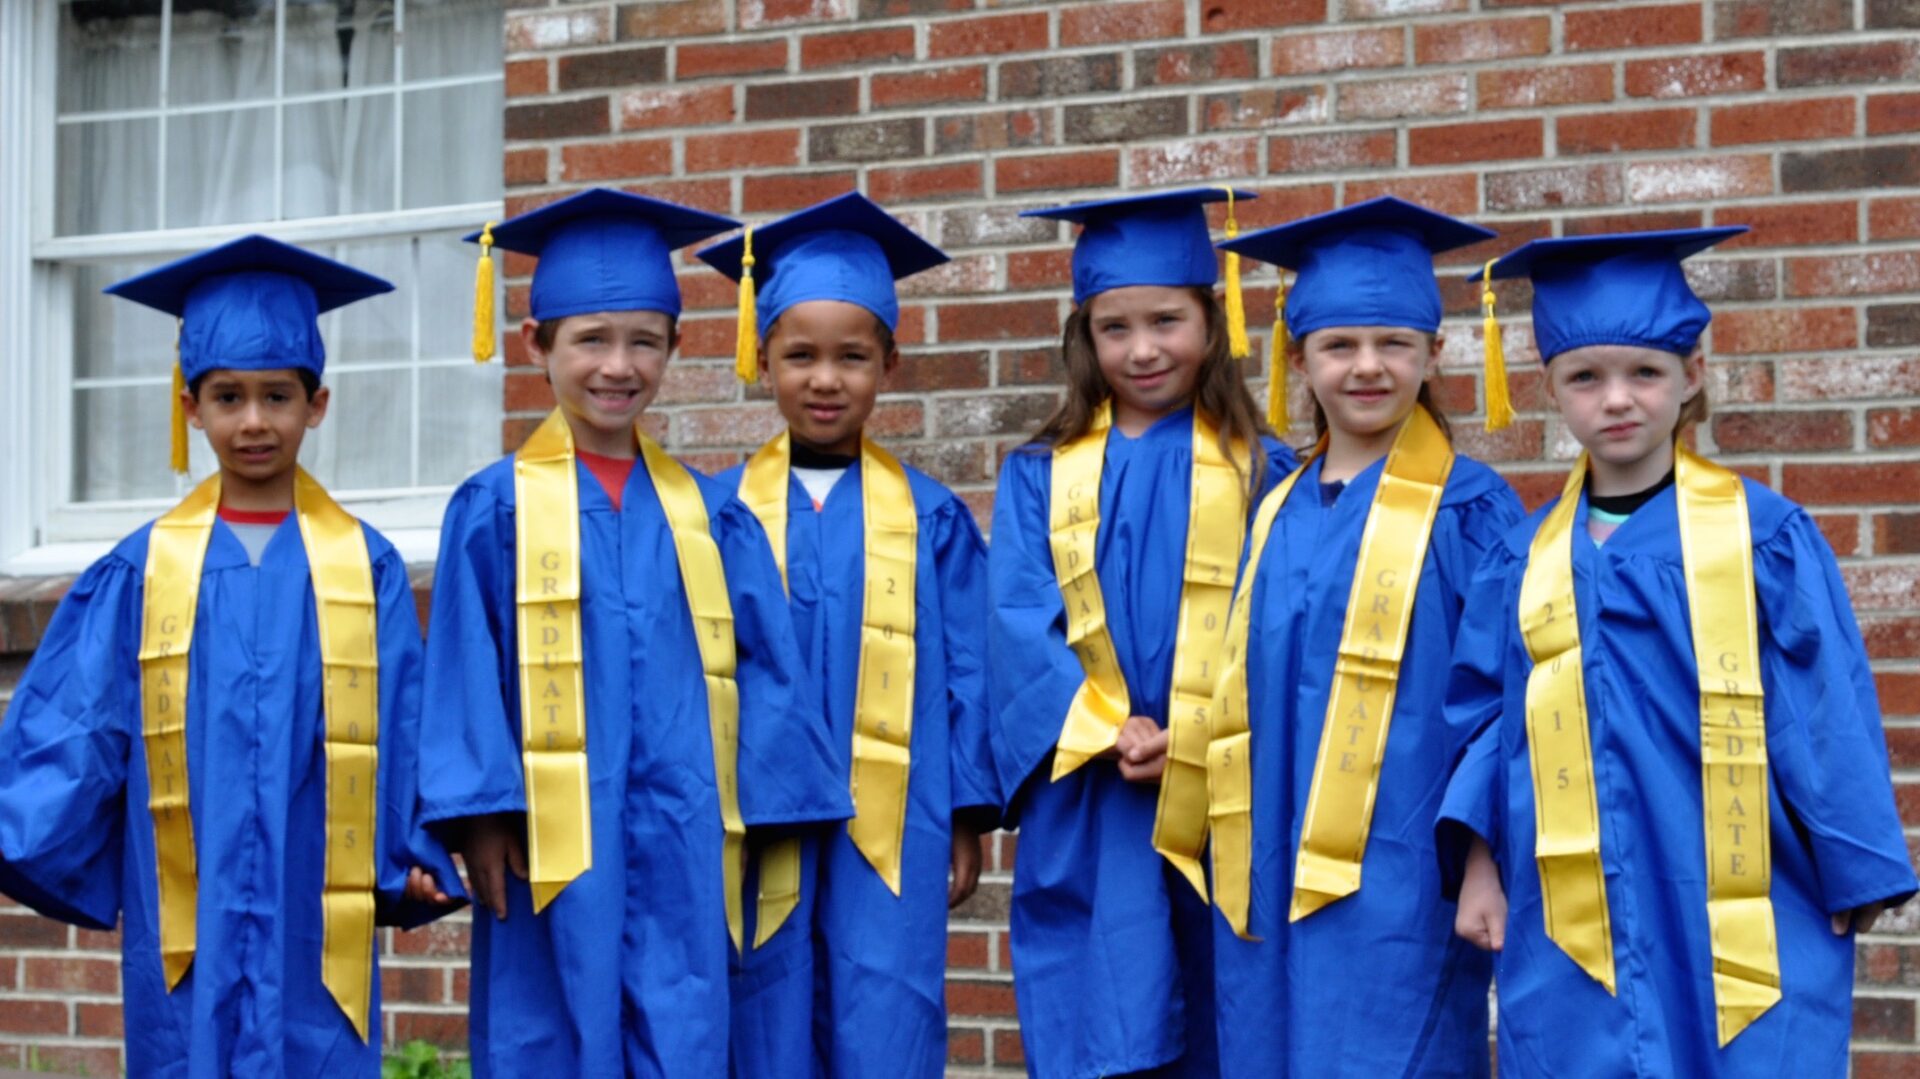 Six kids wearing blue graduation caps and gowns